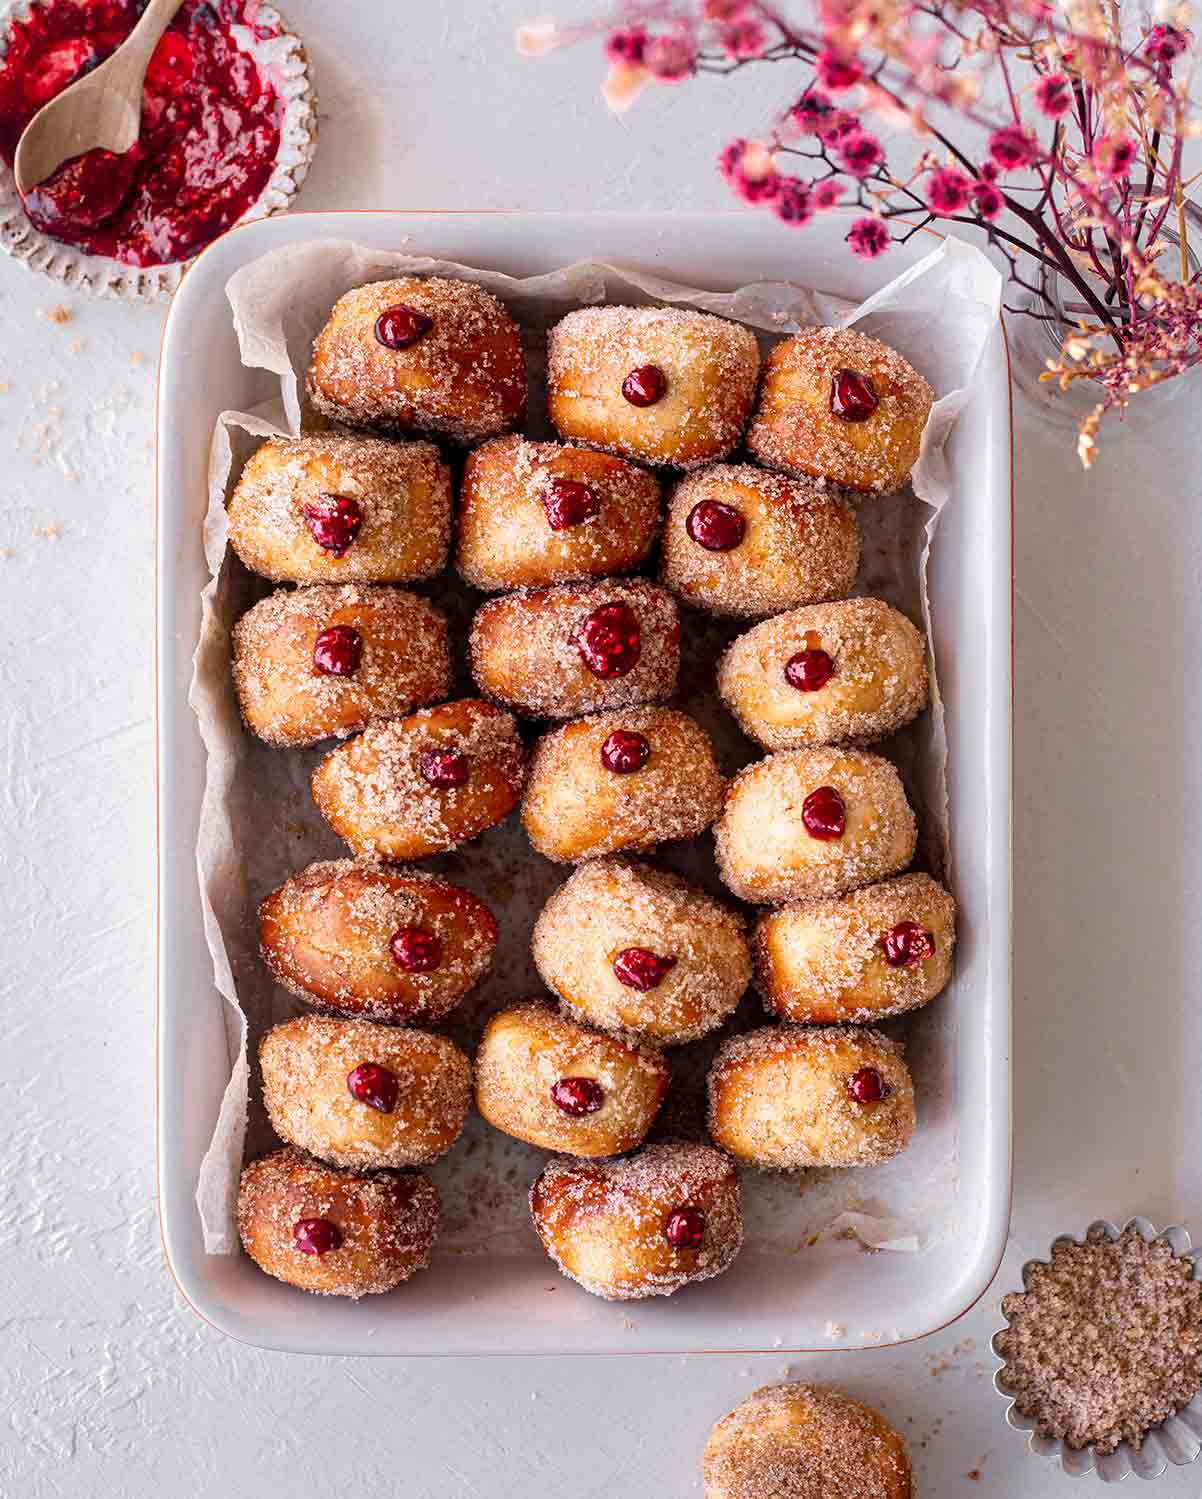 vegan air fried donuts filled with jelly in a white tray